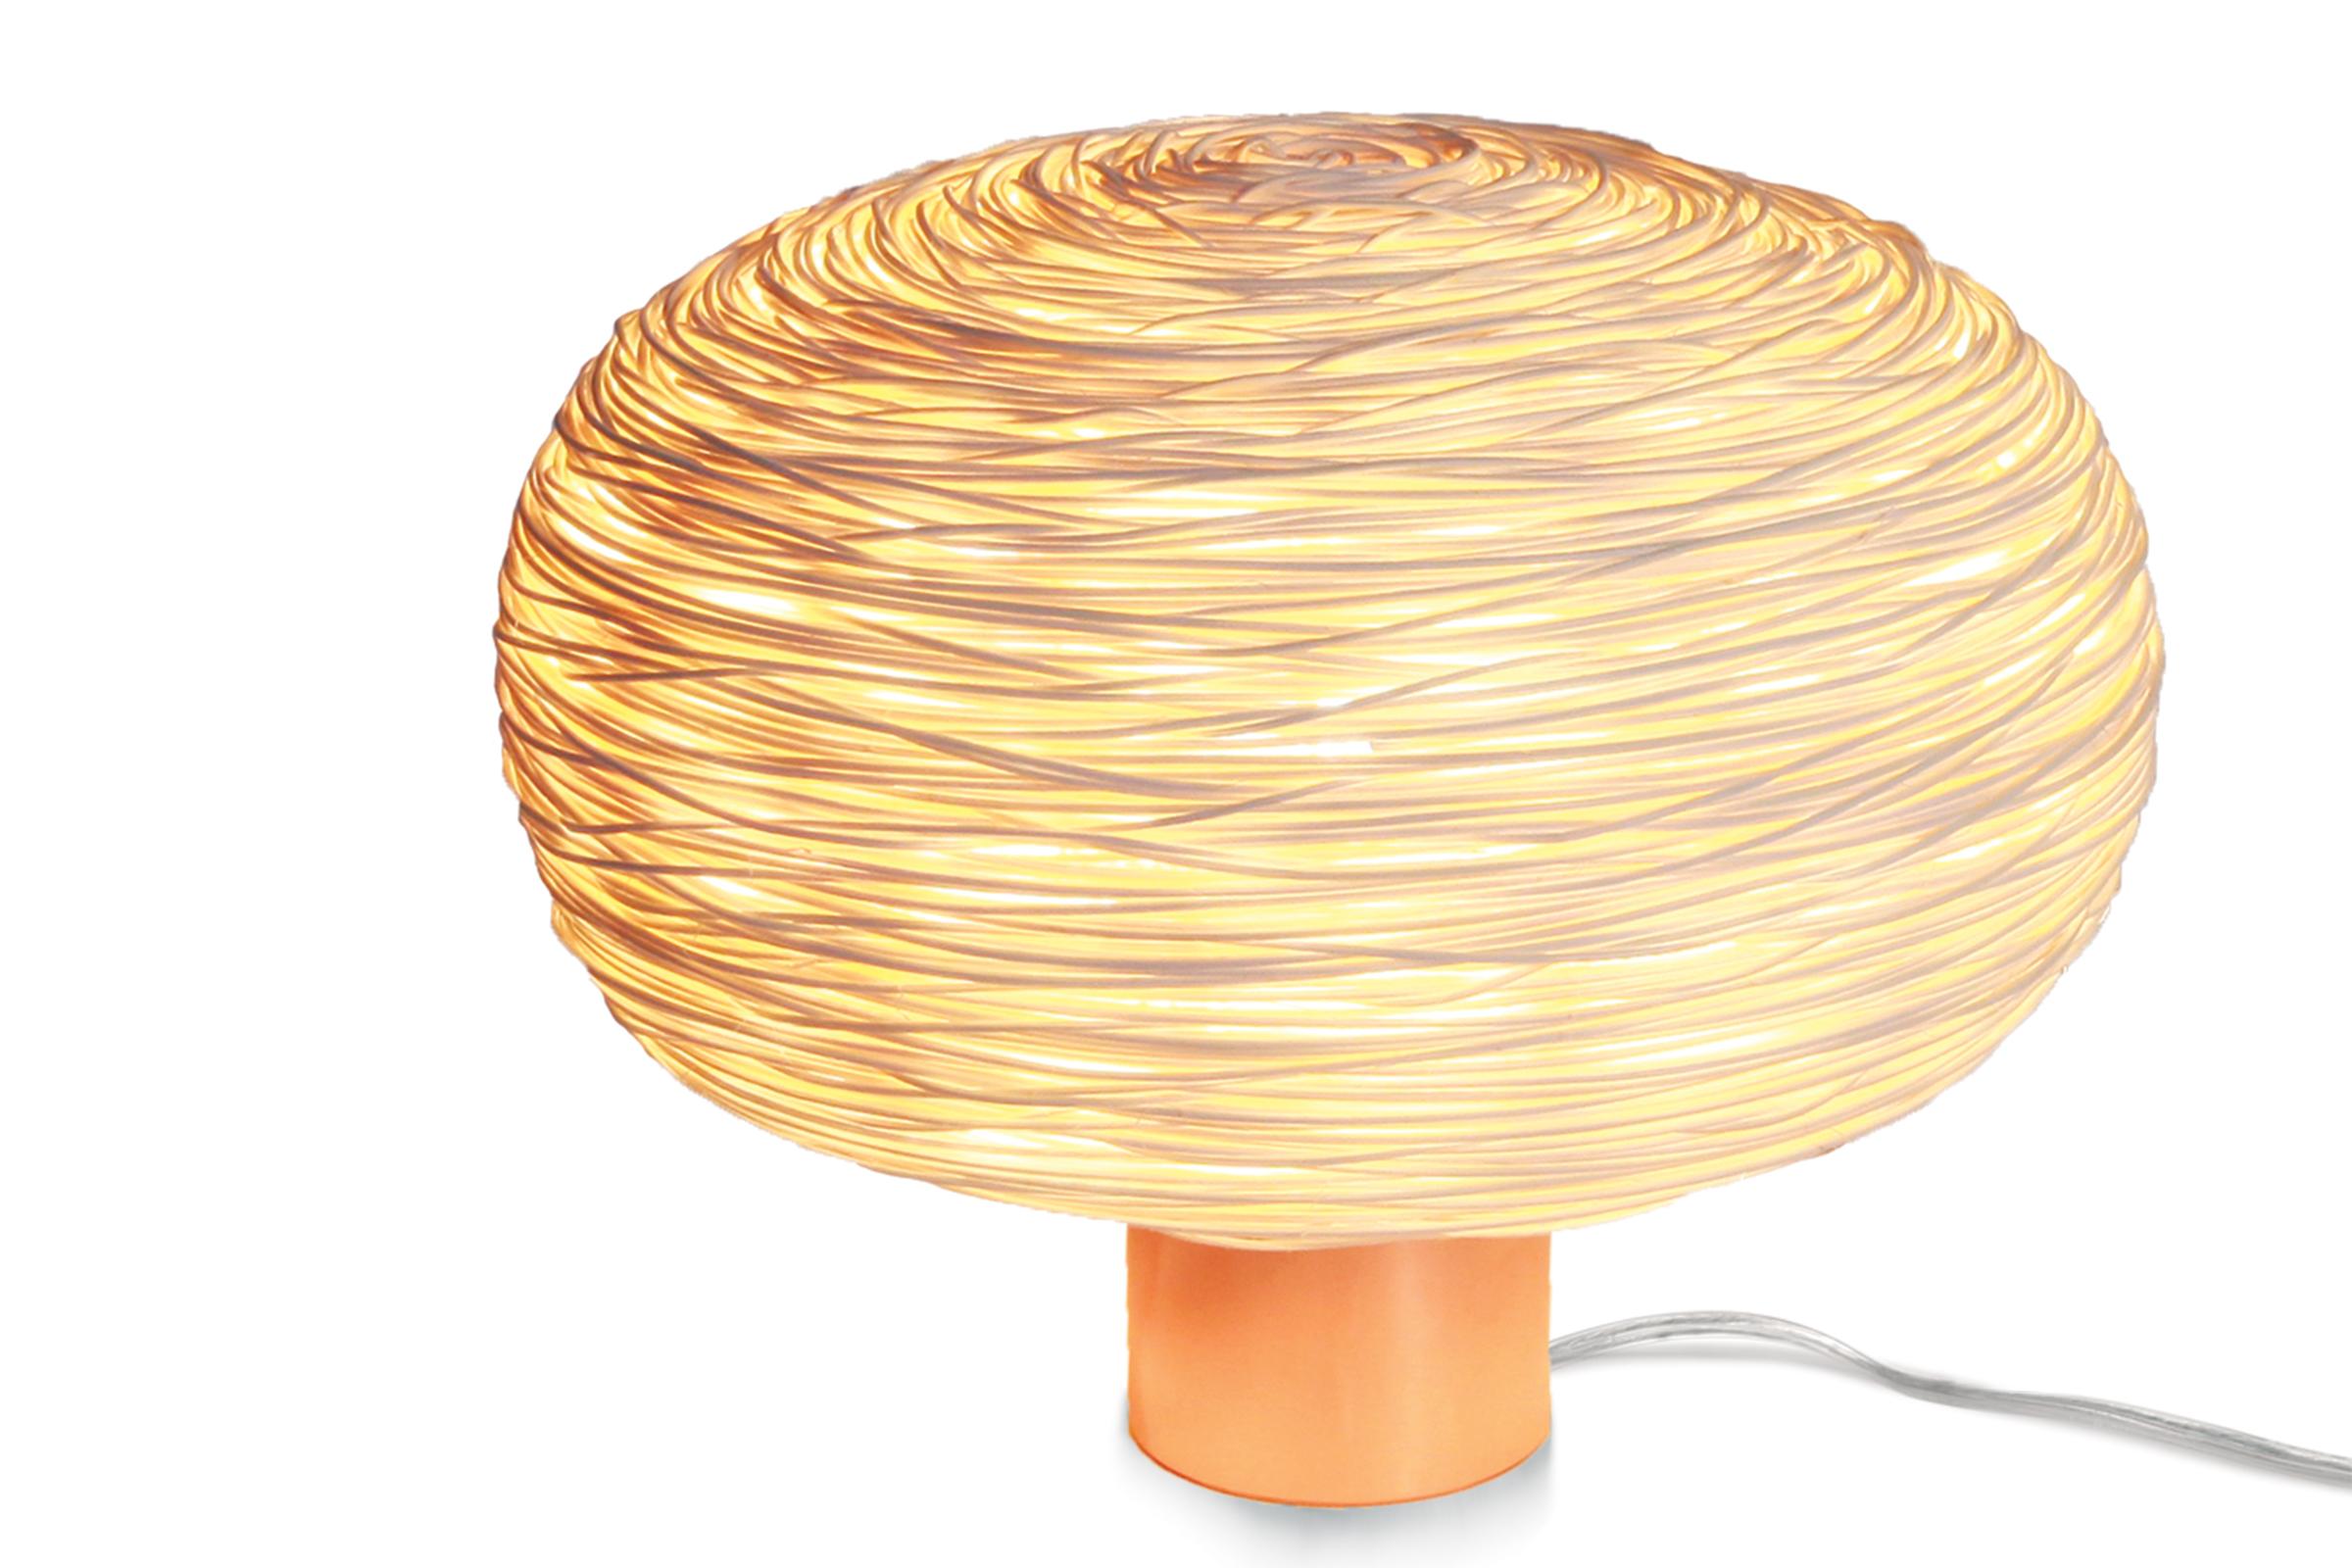 Unit (table-R) is rattan hand-woven table light where the structure evokes a flattened sphere or mini world. The structure is then clad with around one kilometre of superfine 1 mm. rattan wire in a random weave developed by Ango. When used in such a